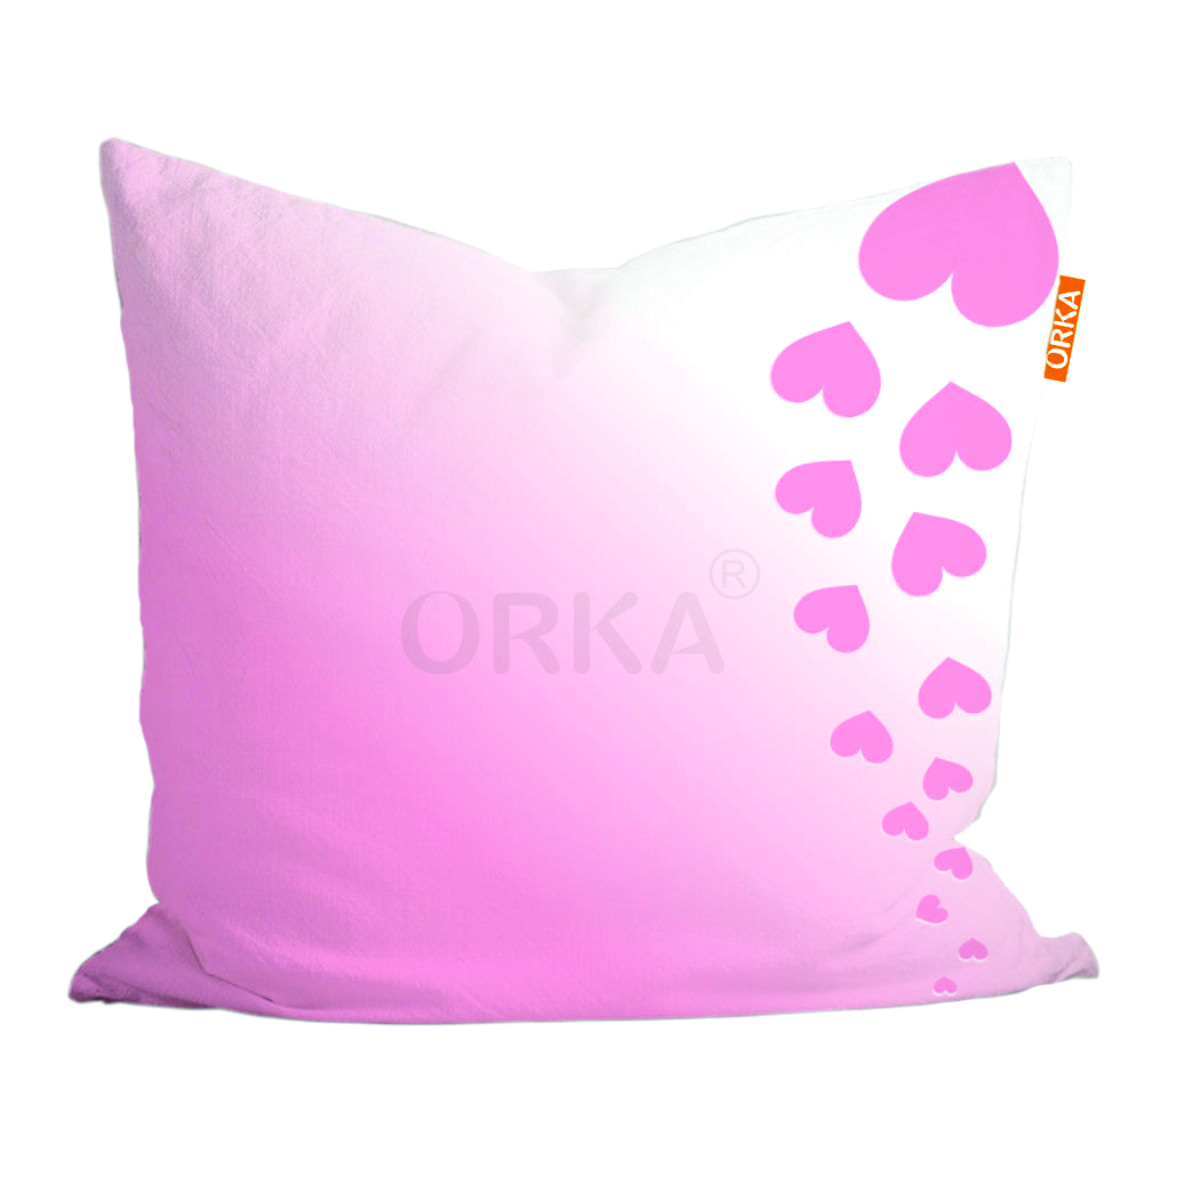 ORKA Valentine Theme Digital Printed Cushion - Pink White 14"x14" Cover Only